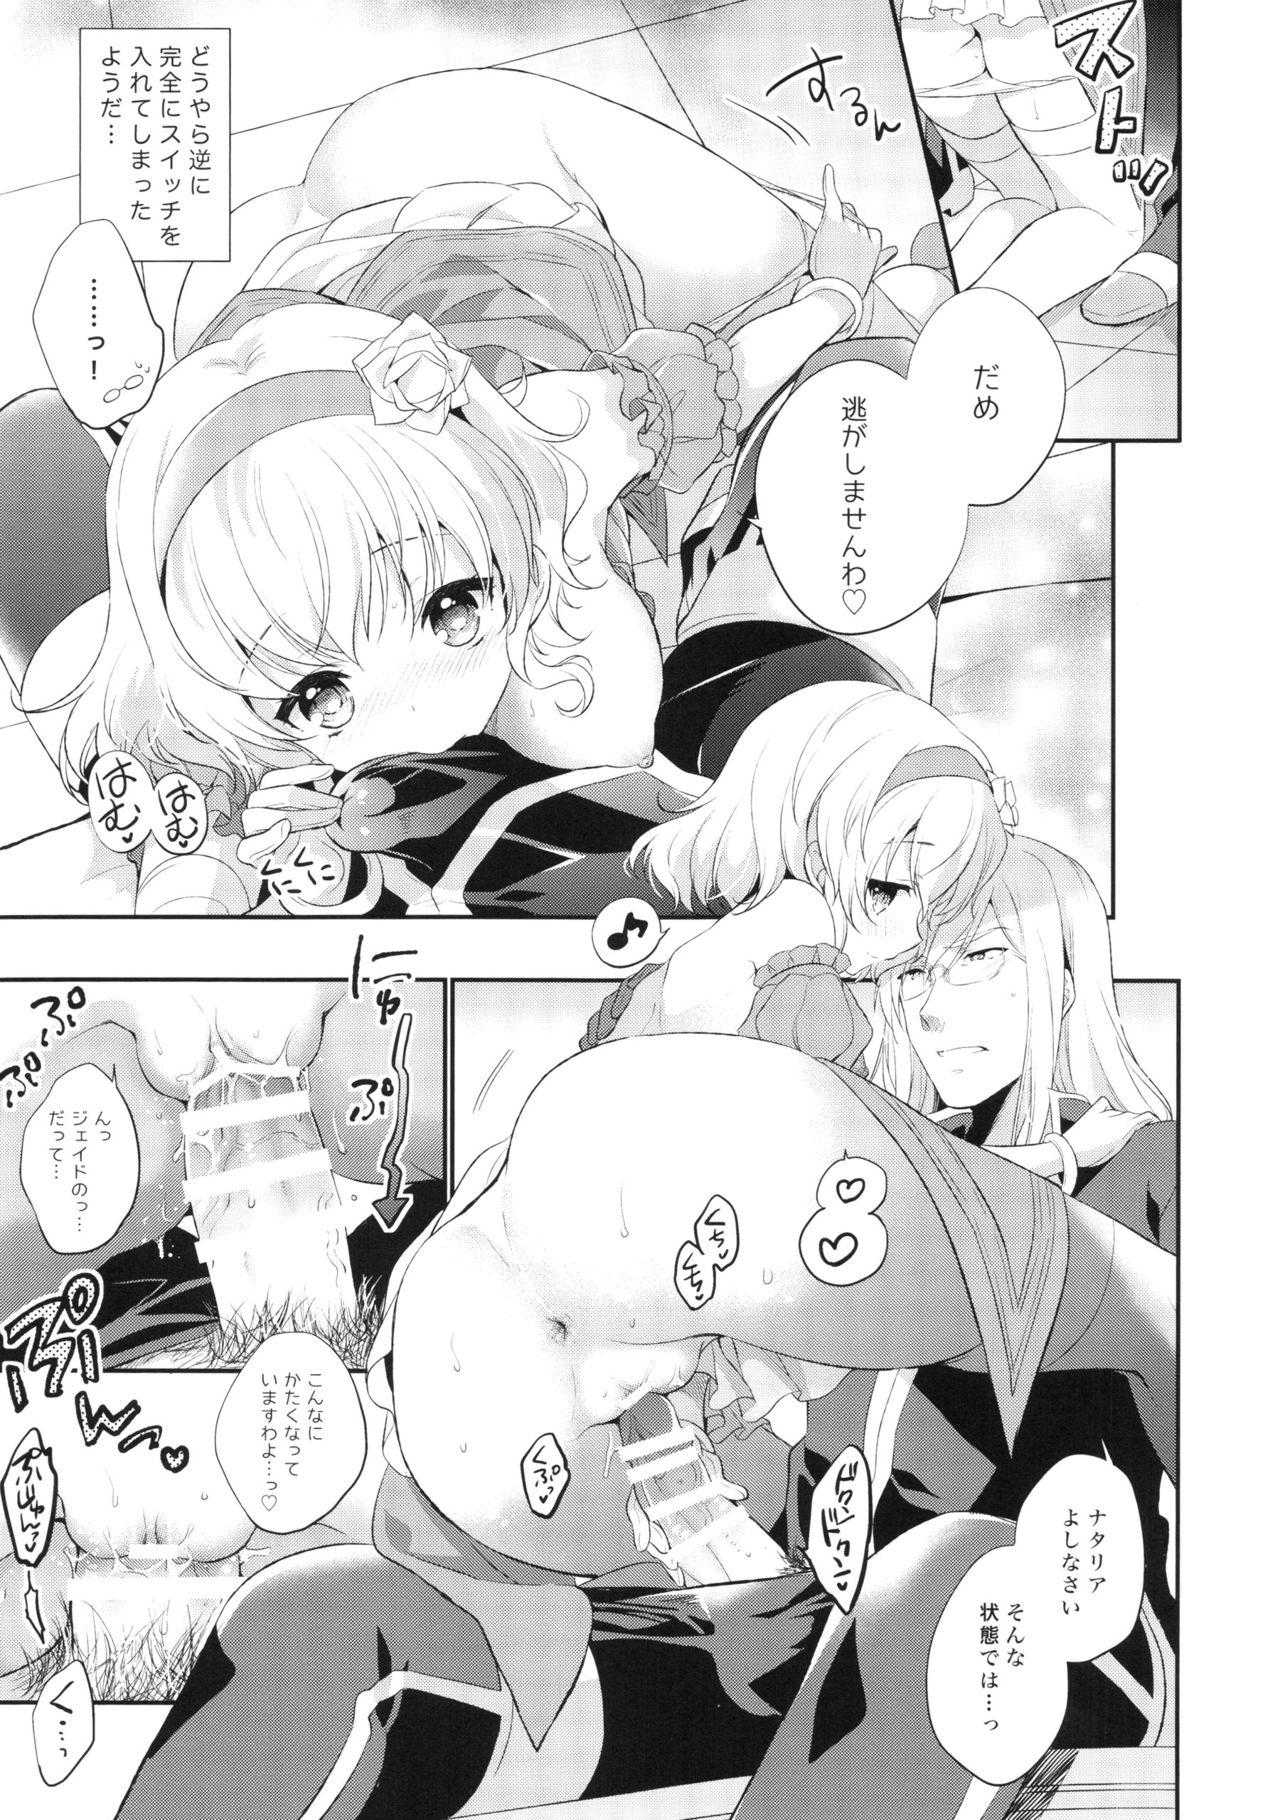 Blondes Temptation Princess - Tales of the abyss Sologirl - Page 9